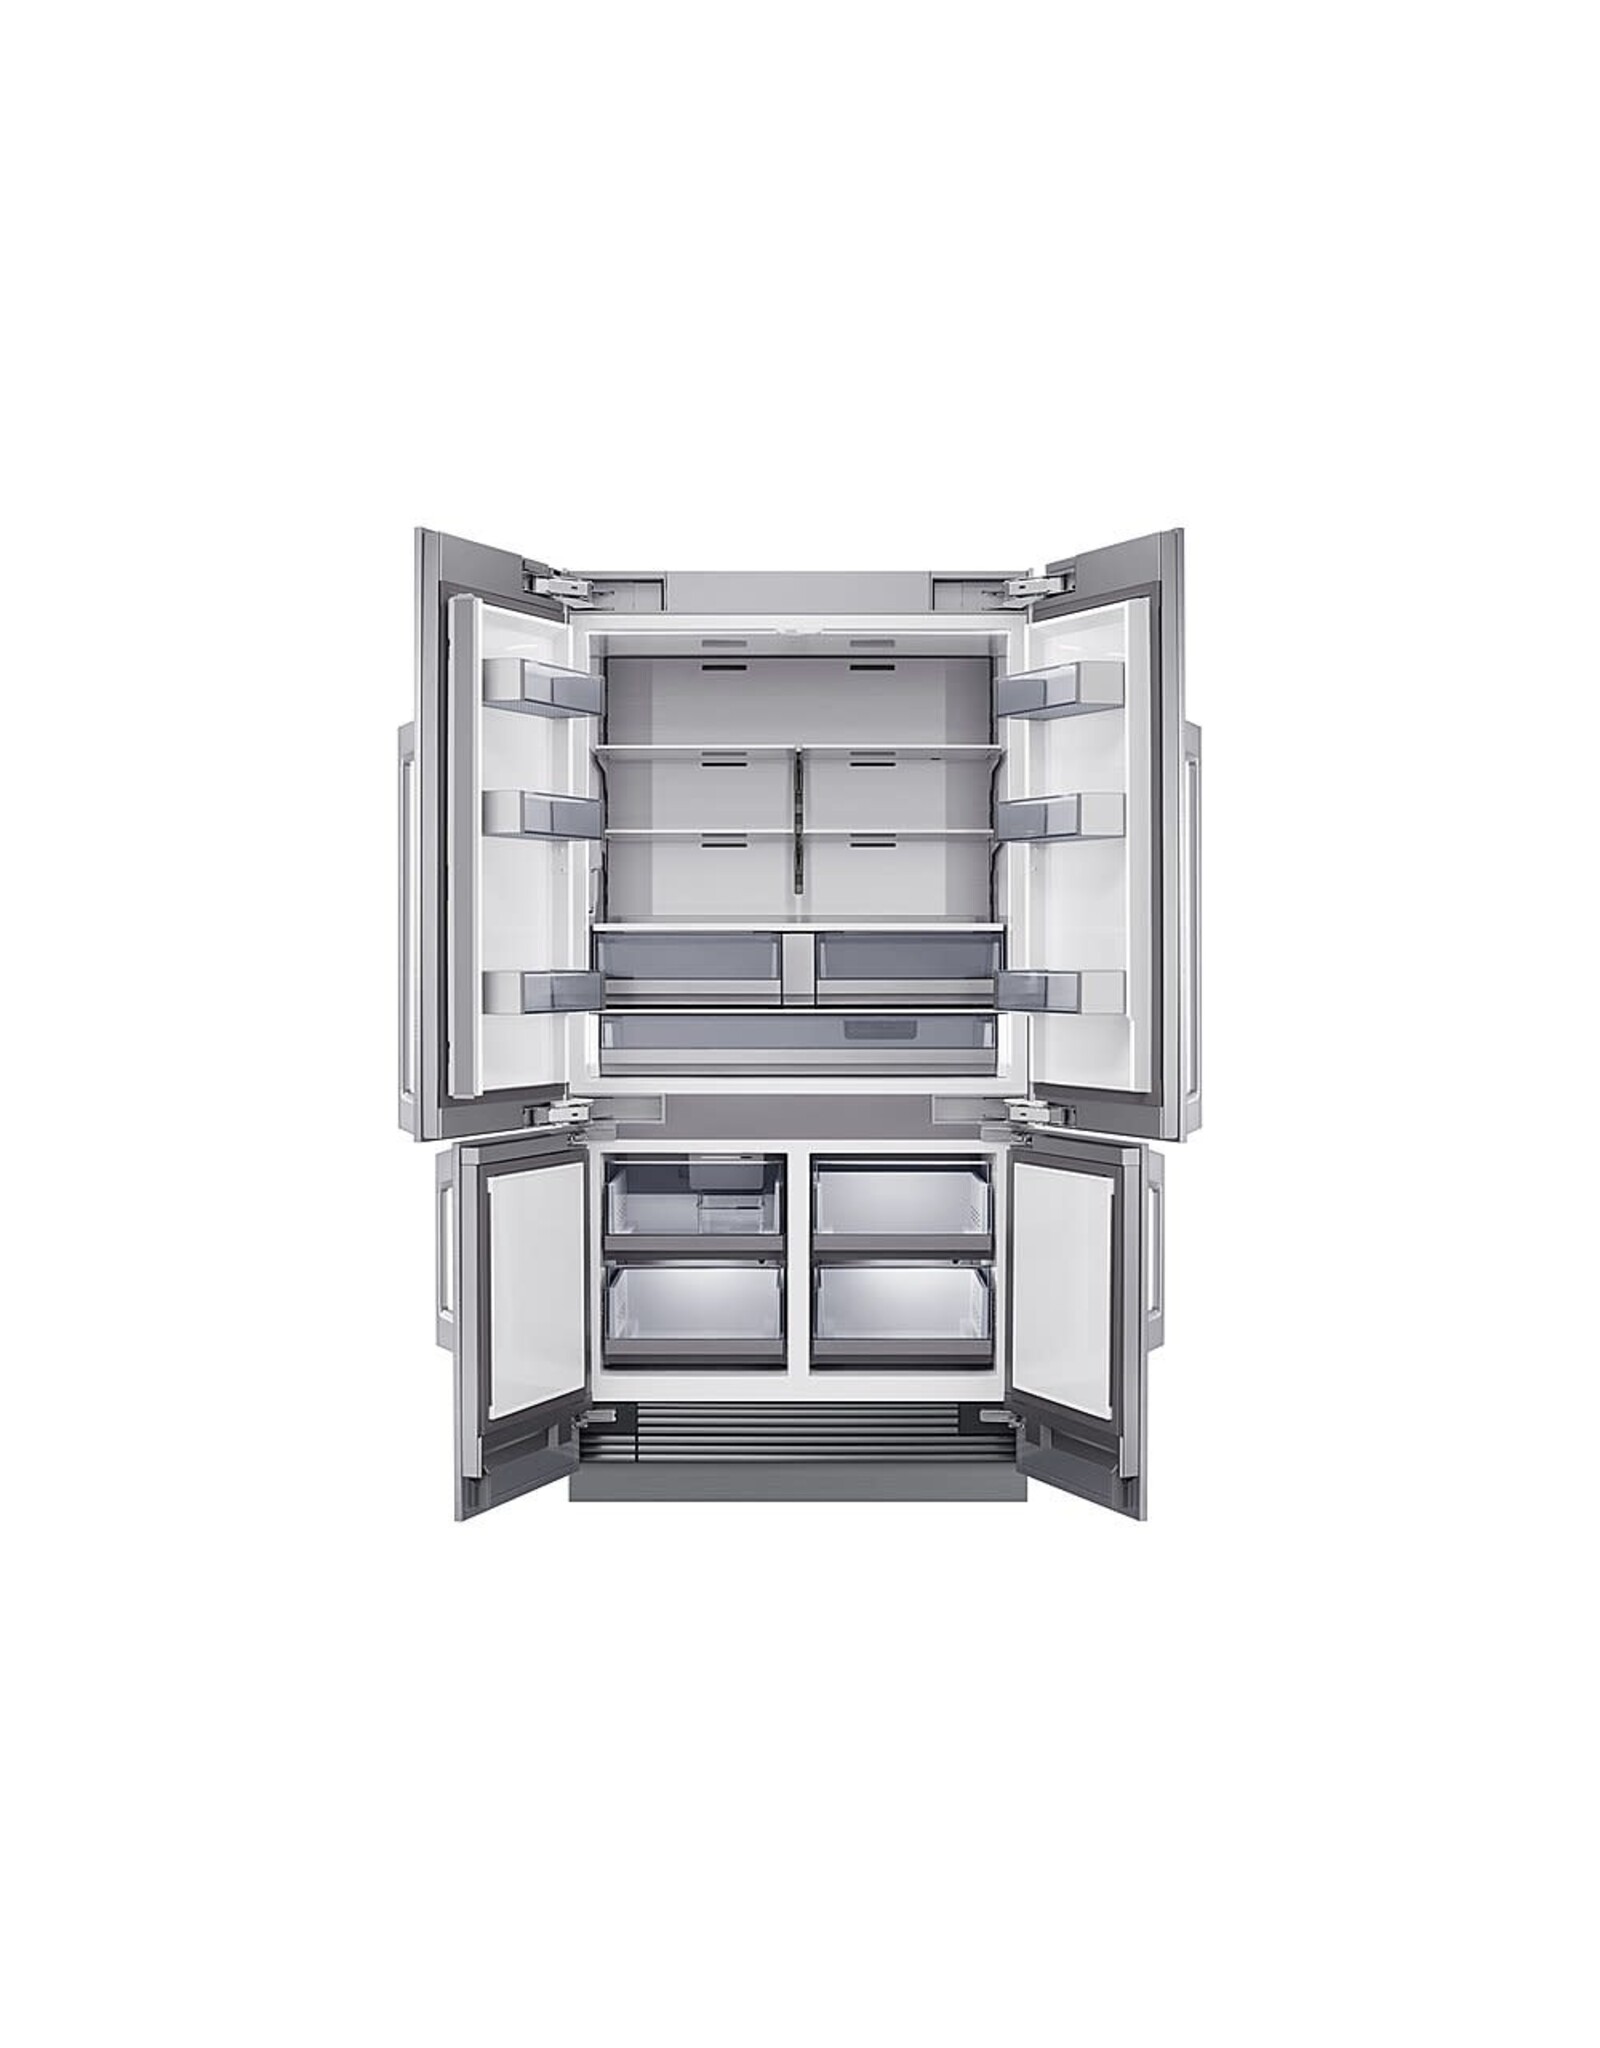 Dacor Transitional DRF425300AP 42 Inch Panel Ready Built-In 4 Door French Door Refrigerator with 23.5 Cu. Ft. Total Capacity, Internal Water Dispenser, Ice Maker, Triple Cooling, FreshZone™ Plus Compartment, FreshZone™ Drawer, Sabbath Mode, and ENERGY STAR® Qualified